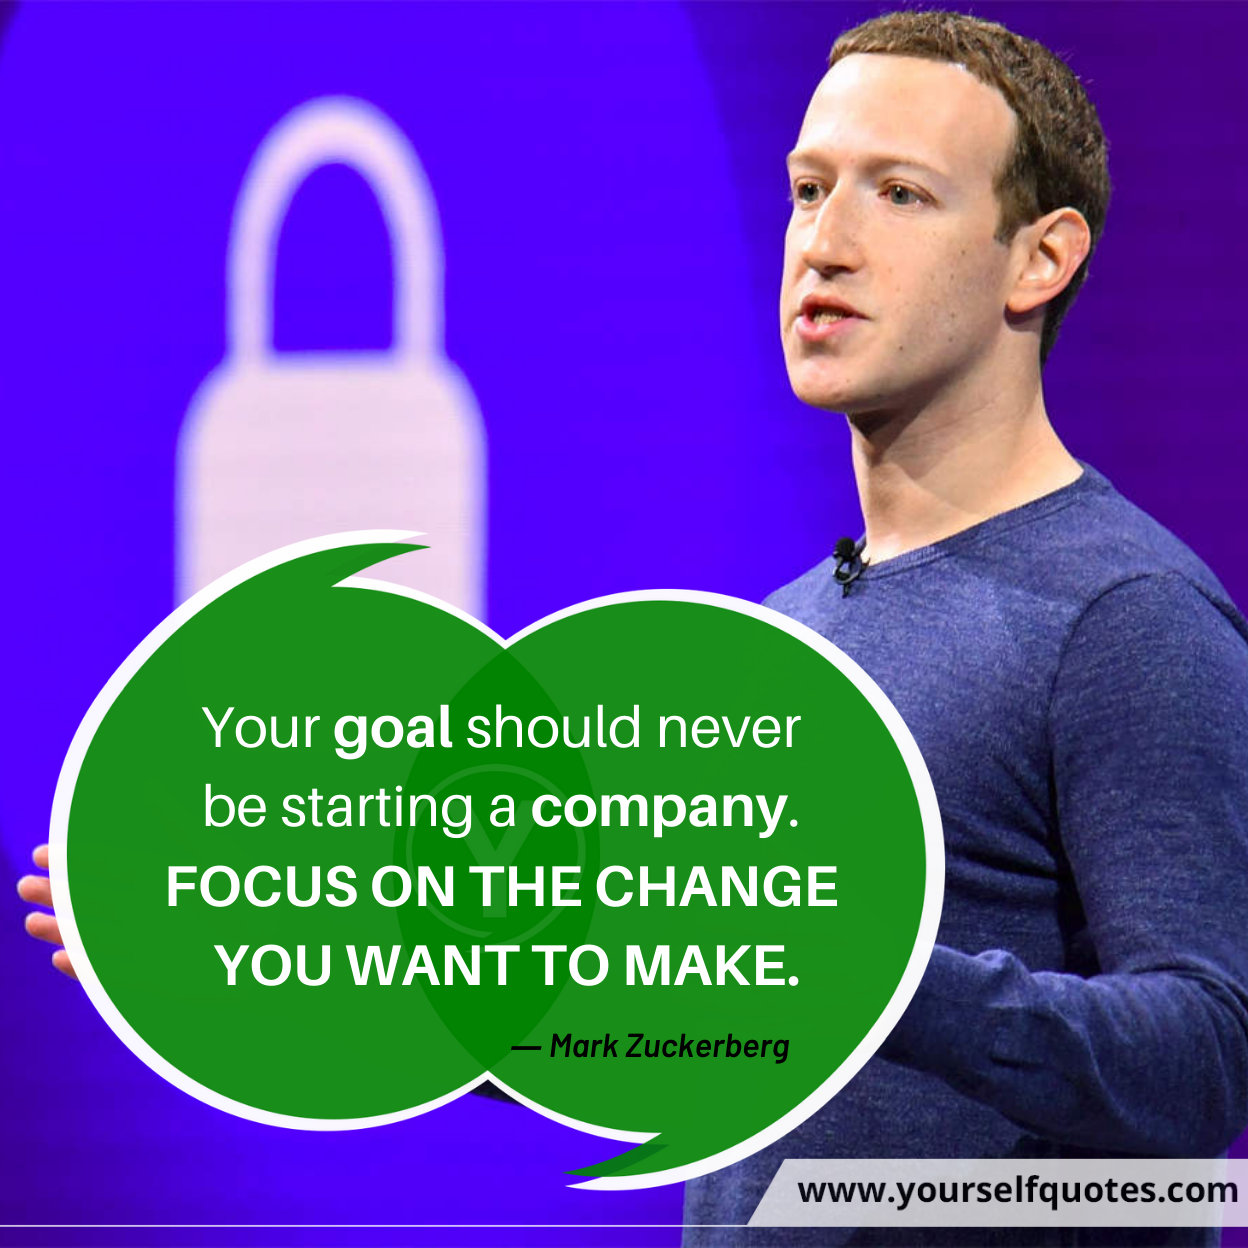 Motivational Quotes Images by Mark Zuckerberg